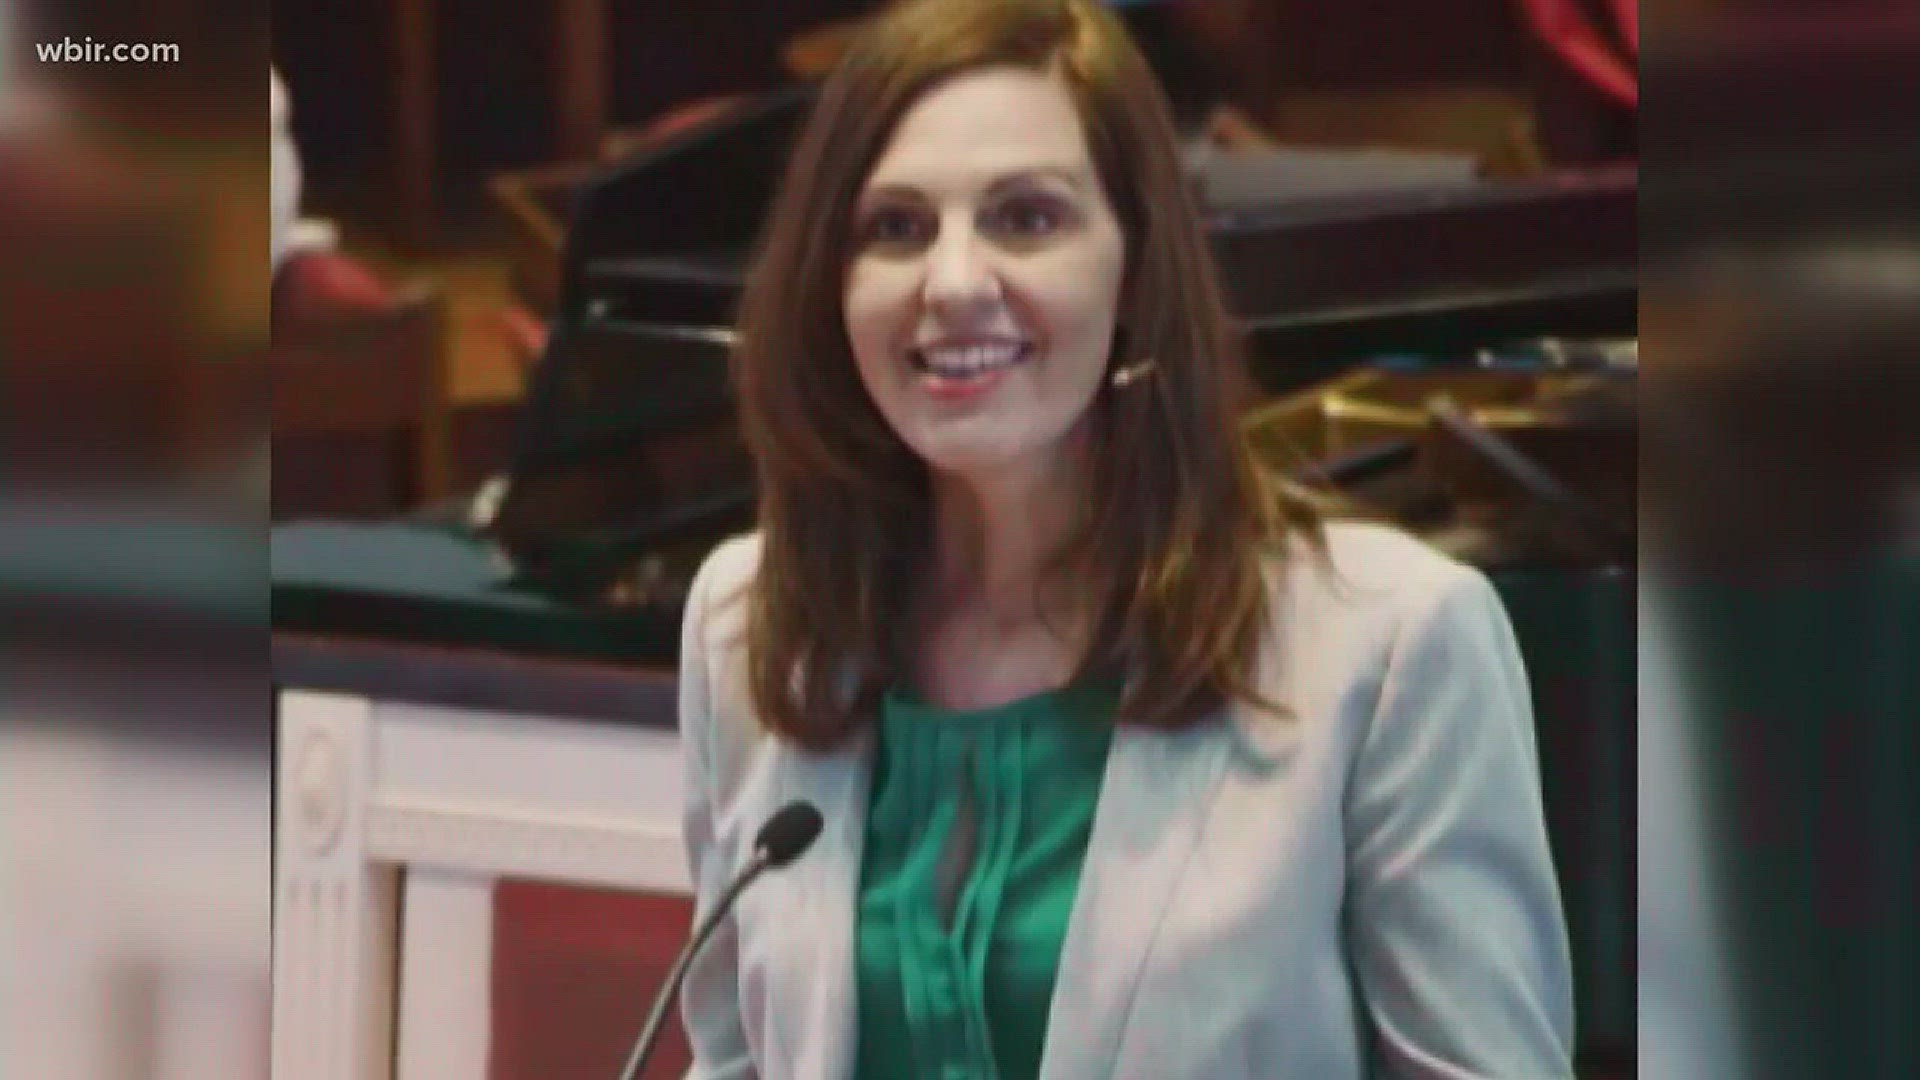 The Tennessee Baptist Convention is not allowing the First Baptist Church of Jefferson City vote in its annual meeting after the church hired a female pastor.